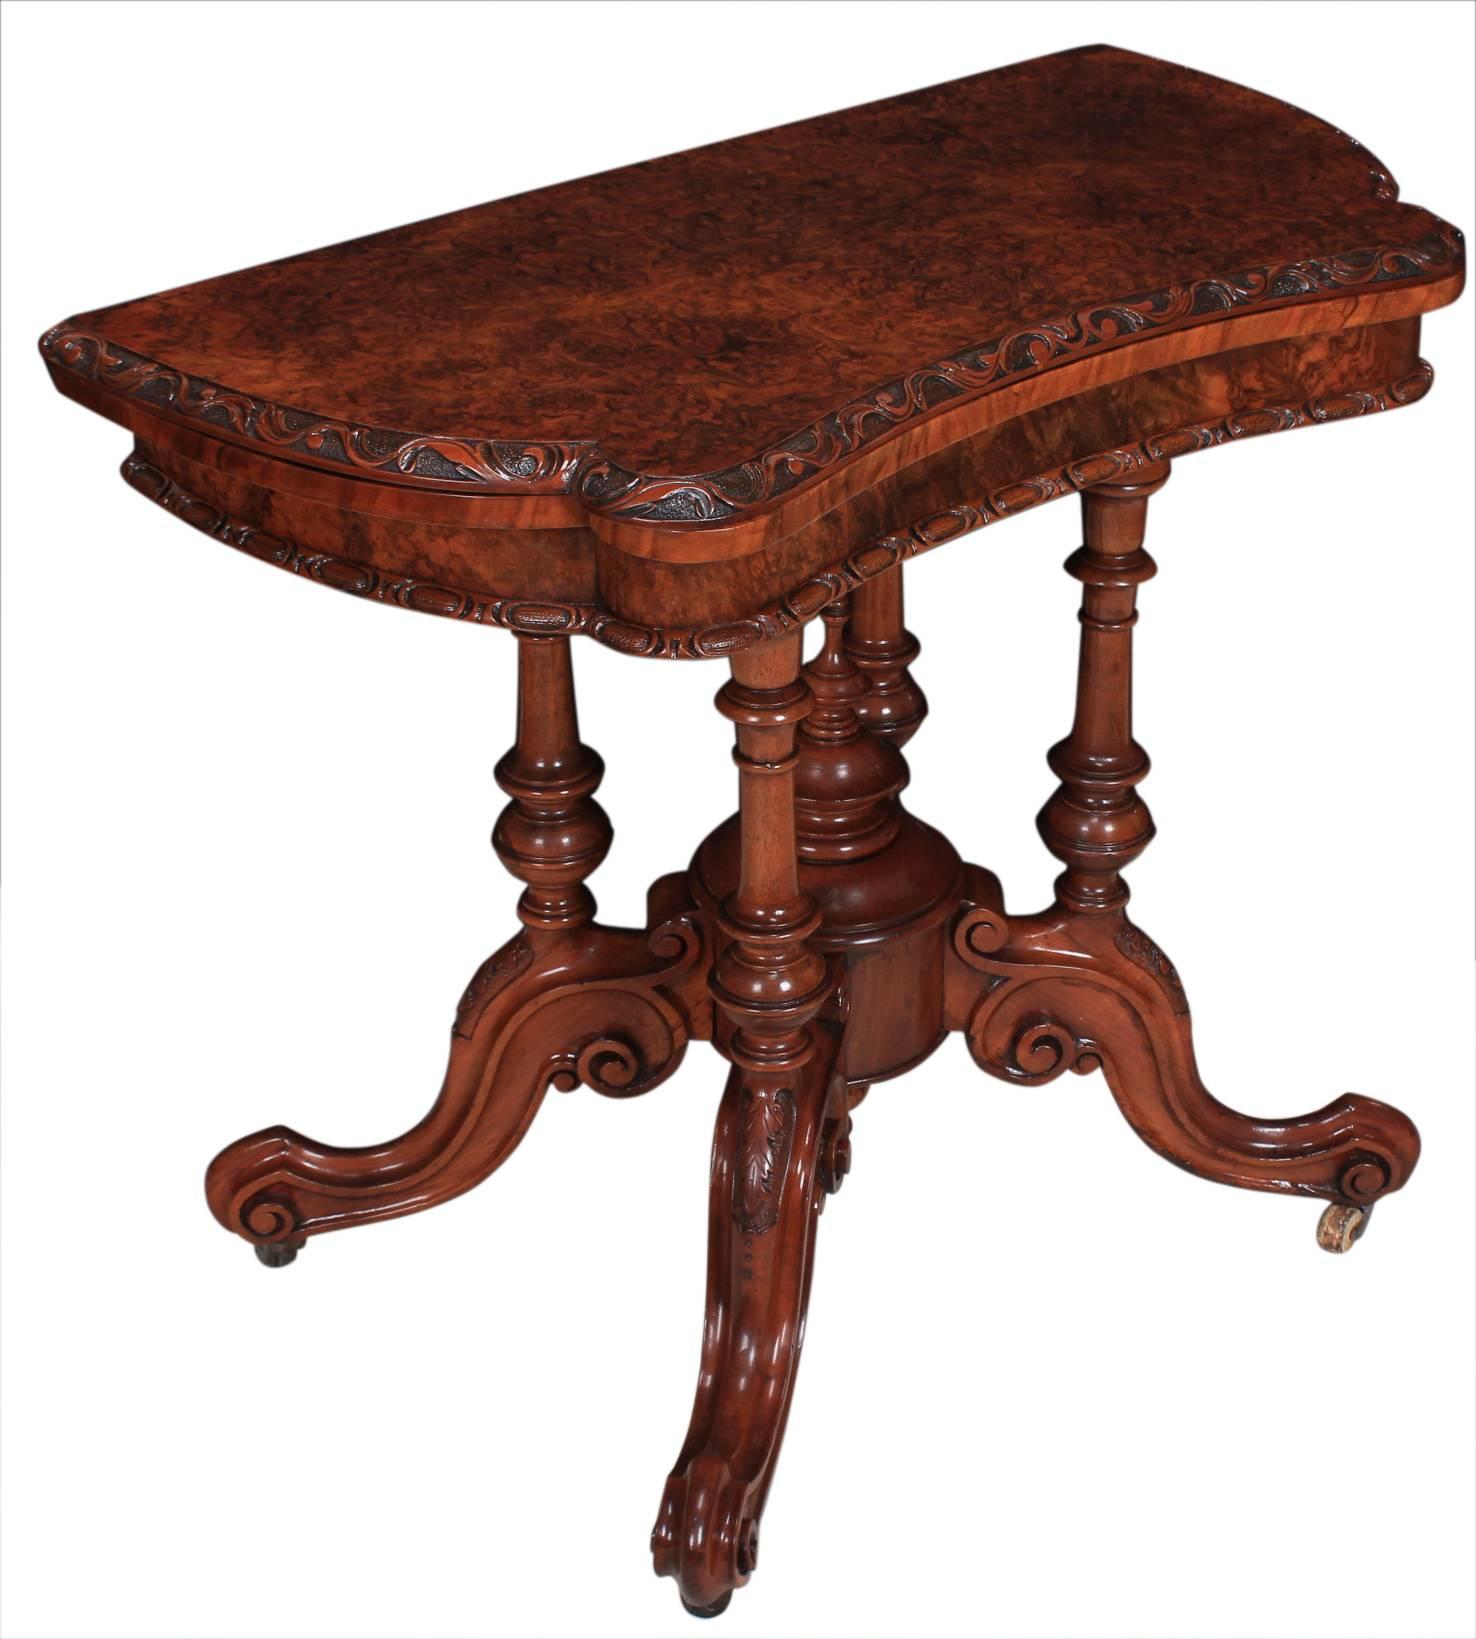 Irish, circa 1870.
This beautifully shaped burr walnut card table has crisp carving and is in showroom condition.
Swivel and fold over top which opens to reveal a green baise playing surface.
On four turned columns on four nicely carved scroll